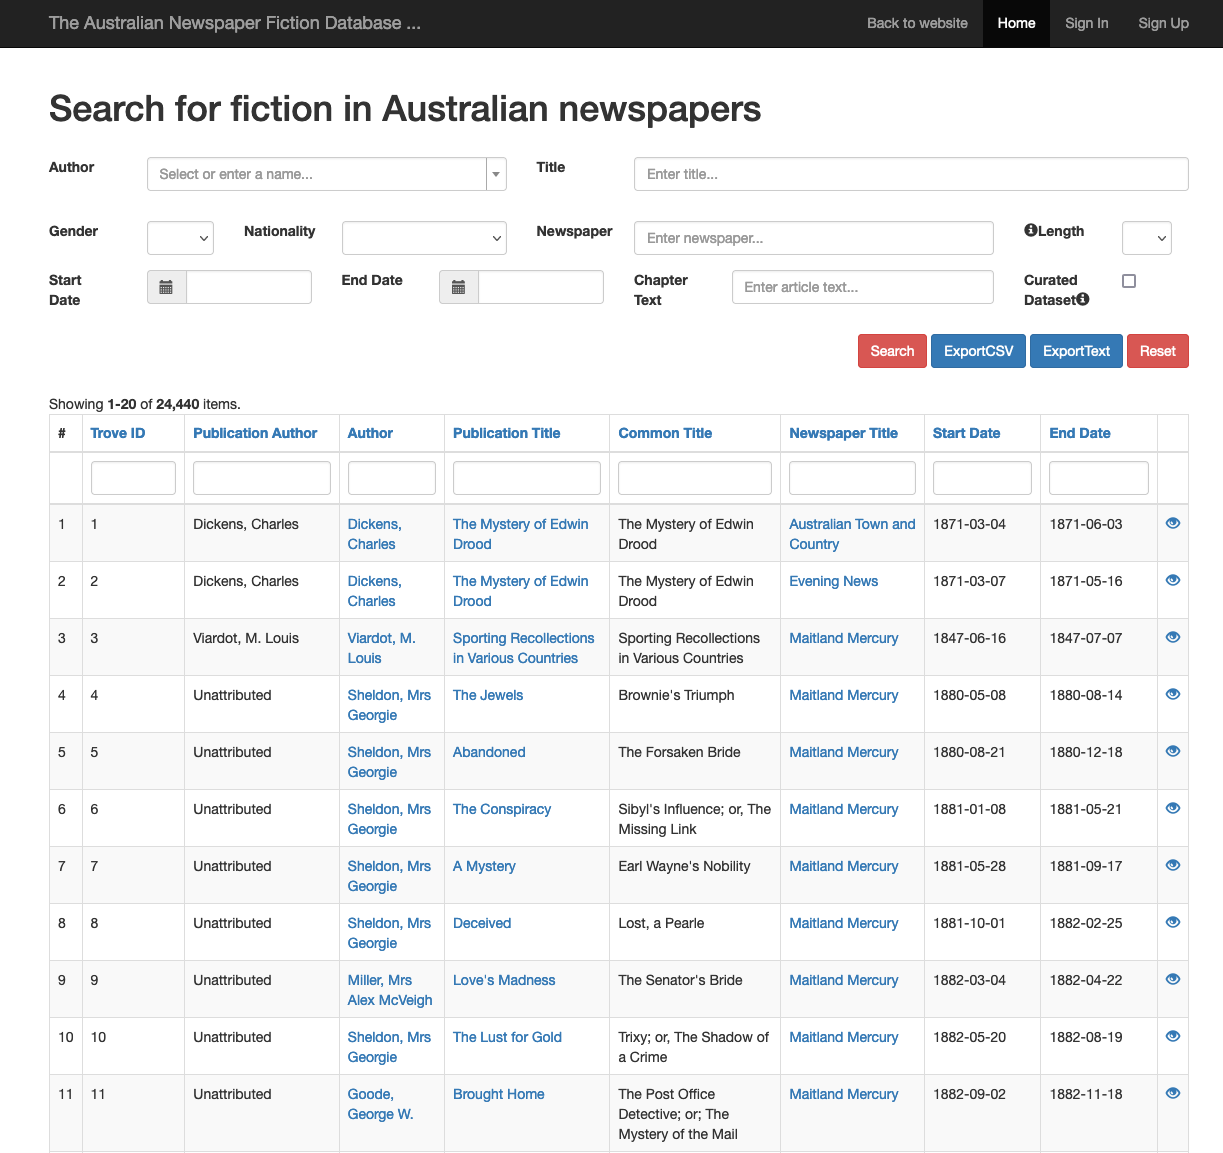 Bode's database of fiction in Australian newspapers.